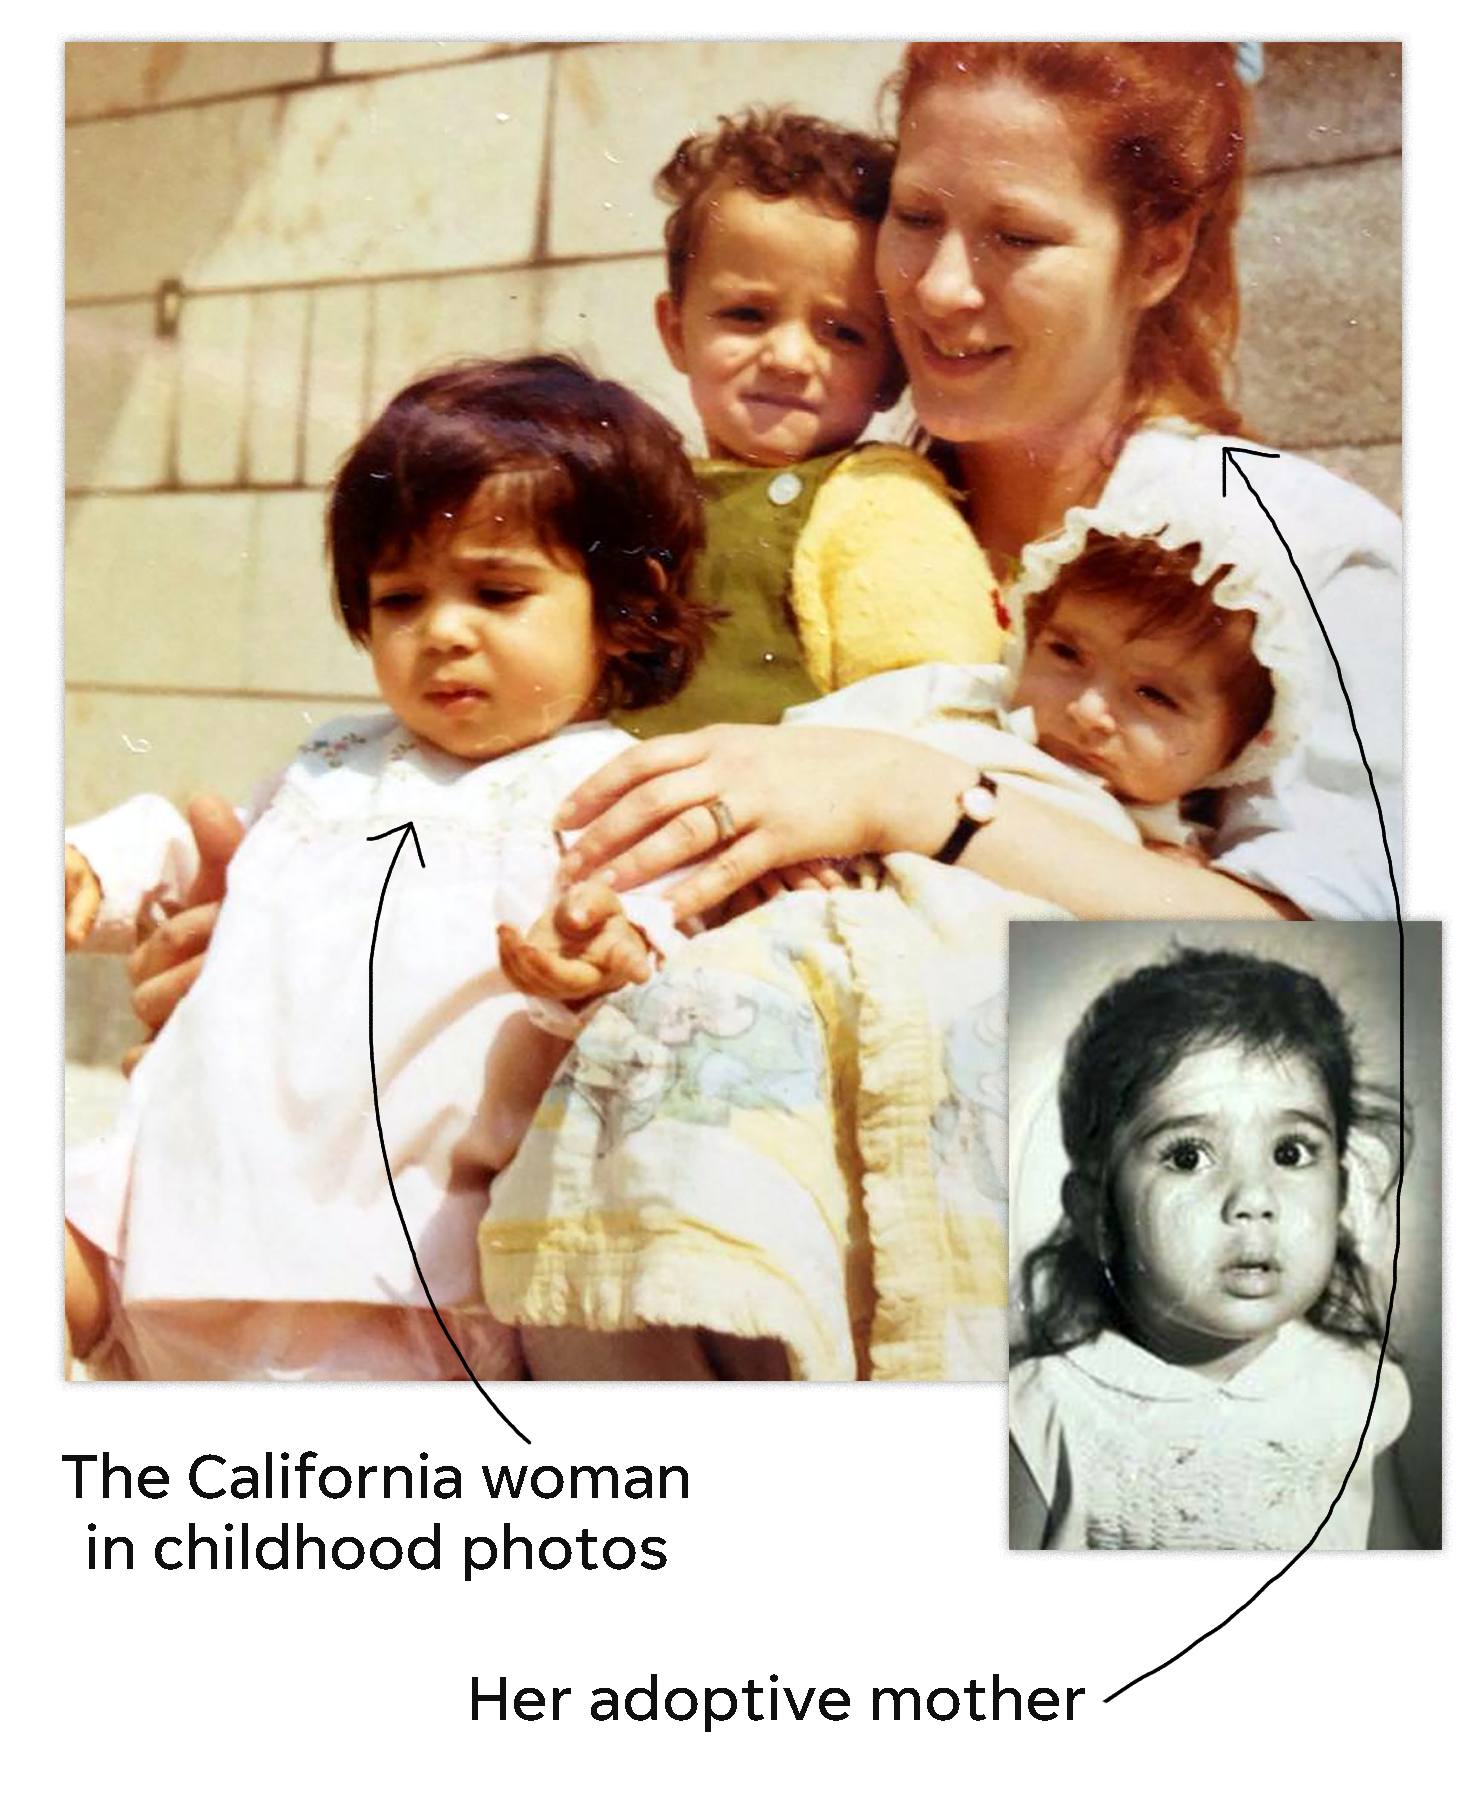 A photo of the California woman, far left, when she was a child with her adoptive mother and siblings in Iran. Adopted from Iran when she was 2, the woman learned she was not a U.S. citizen when she was 38, after she applied for a passport.